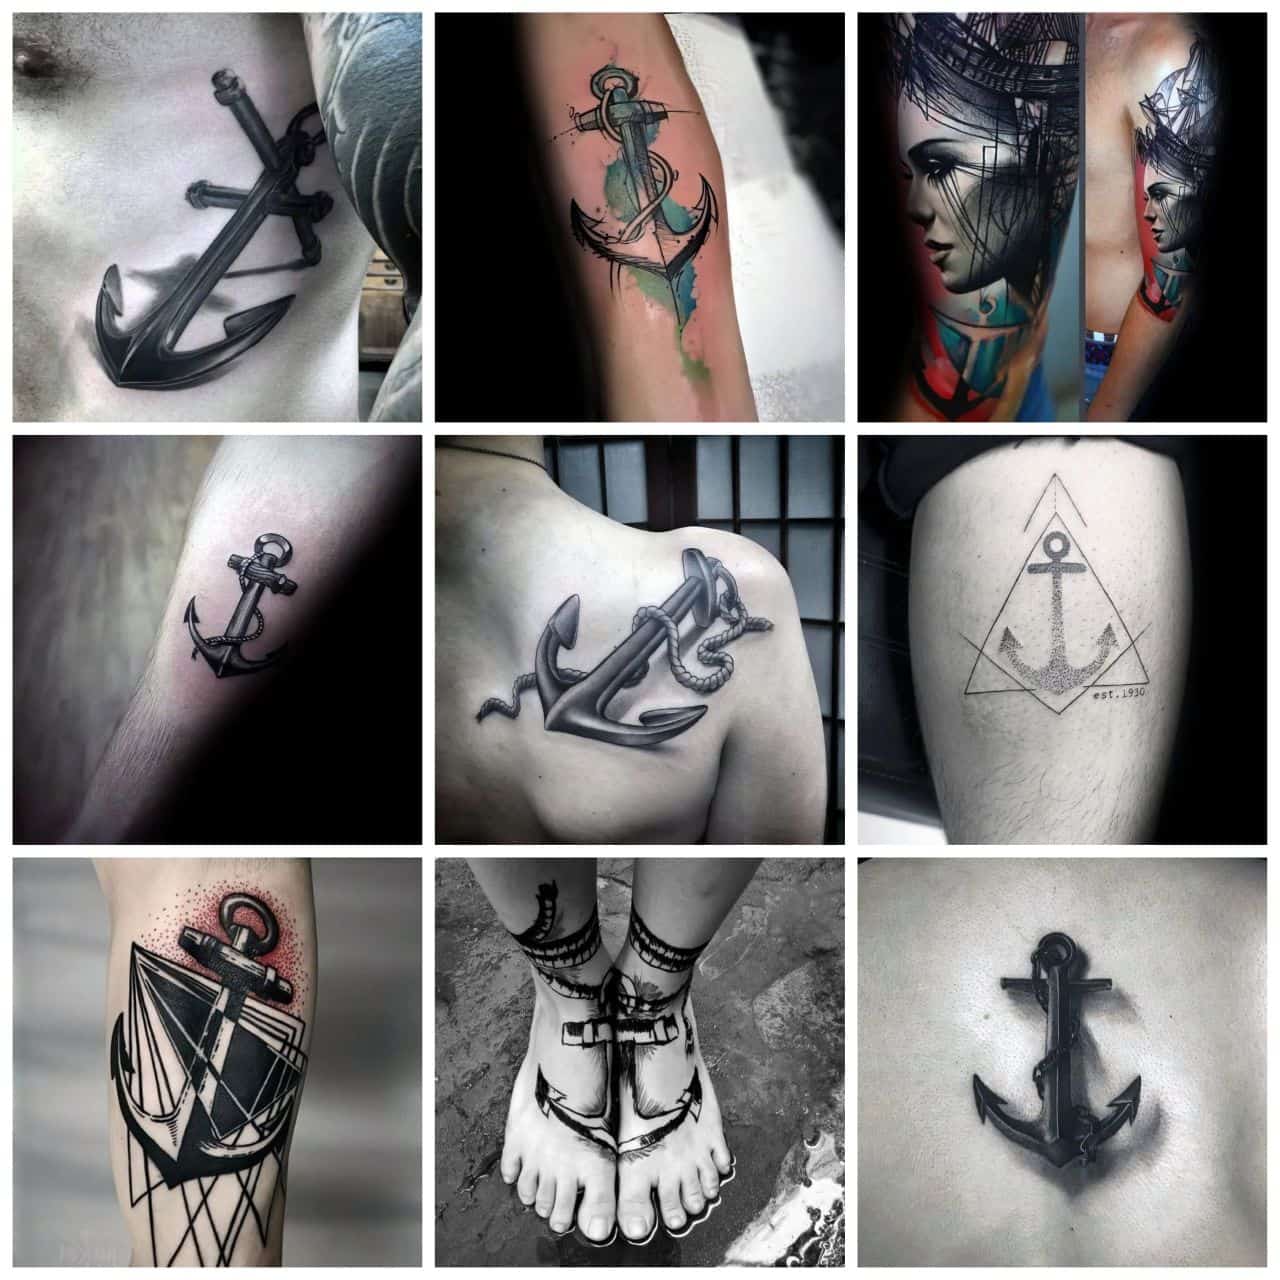 We Found 60 Inspiring Anchor Tattoo Ideas To Fit Your Look — InkMatch